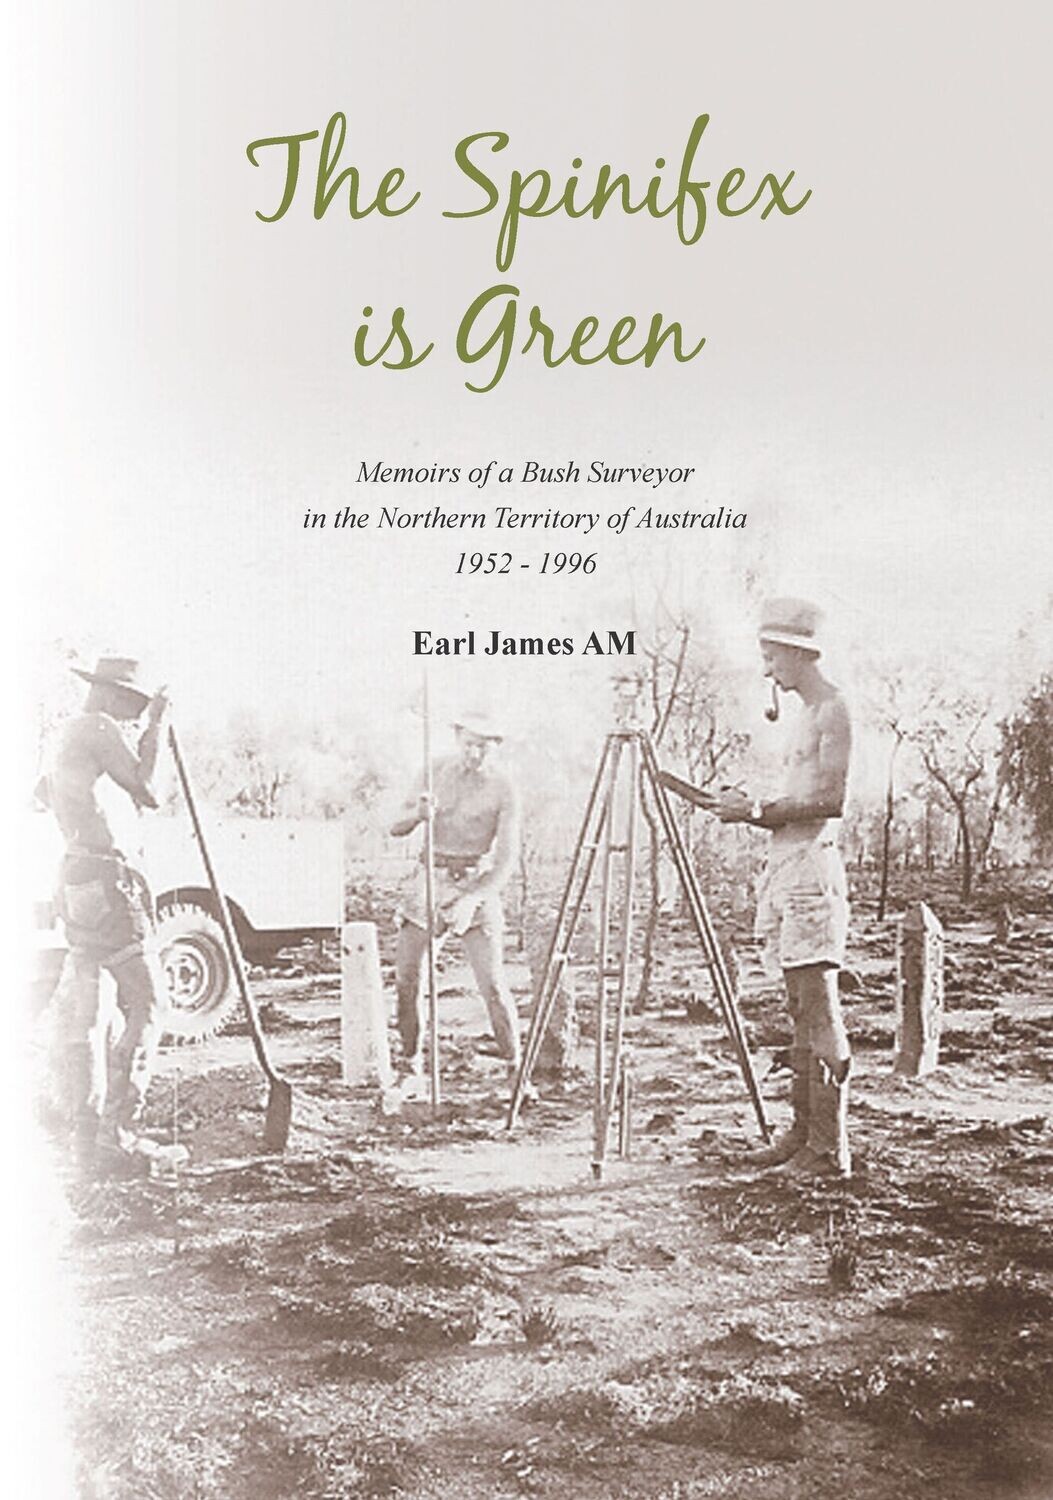 The Spinifex is Green Memoirs of the Bush Surveyor in the Northern Territory of Australia 1952-1996